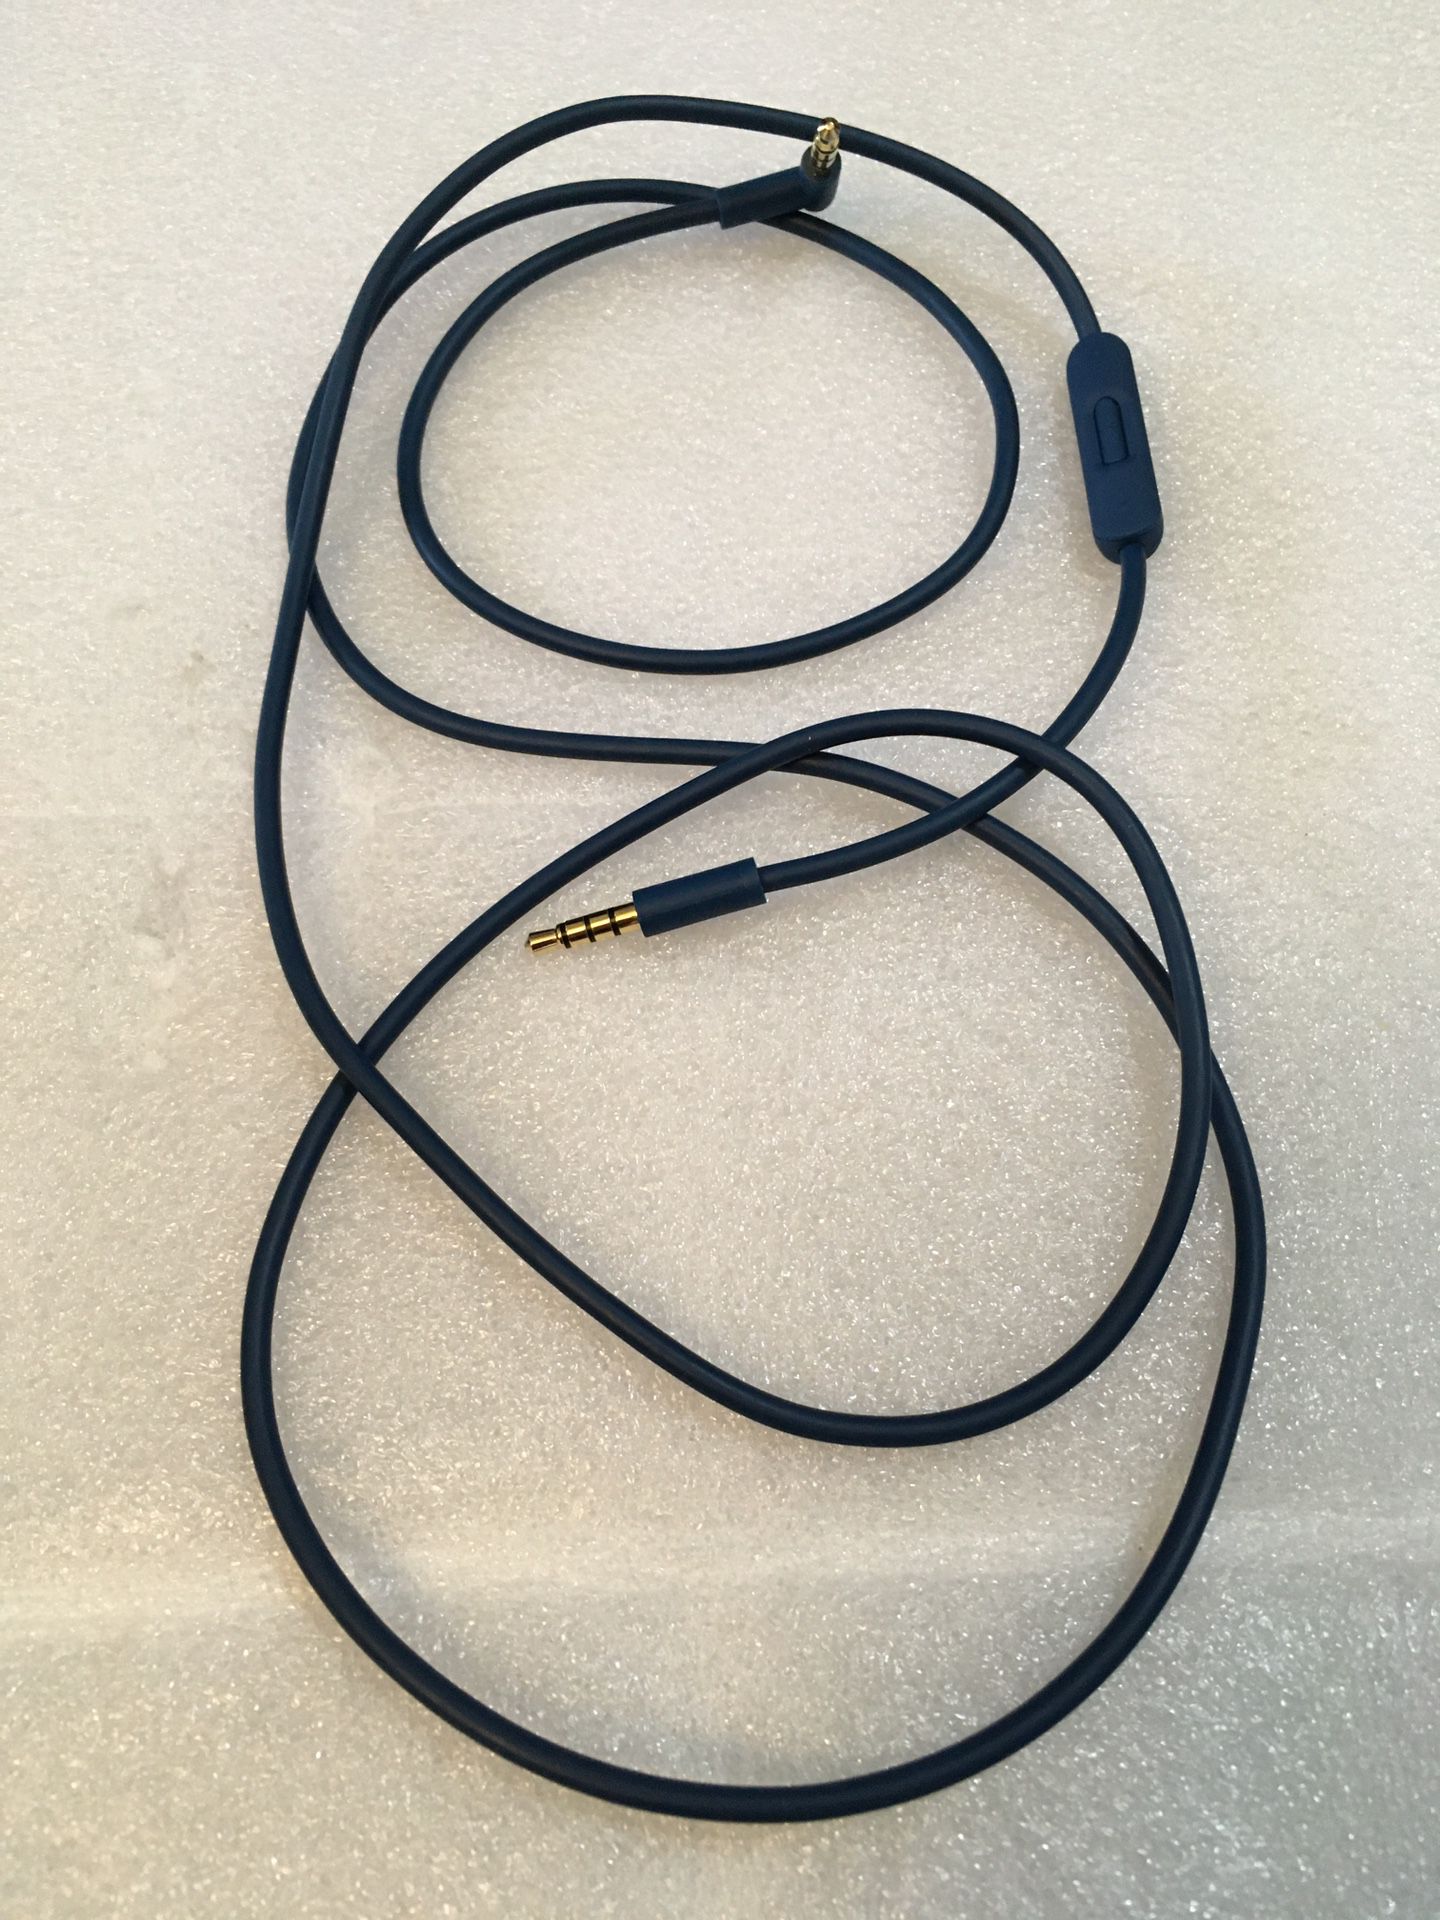  Beats Genuine Aux Cable For Beats By Dr Dre Wireless Noise Cancelling Headphones. 4 ft long   This is original beats by dr dre aux cable . Working pe